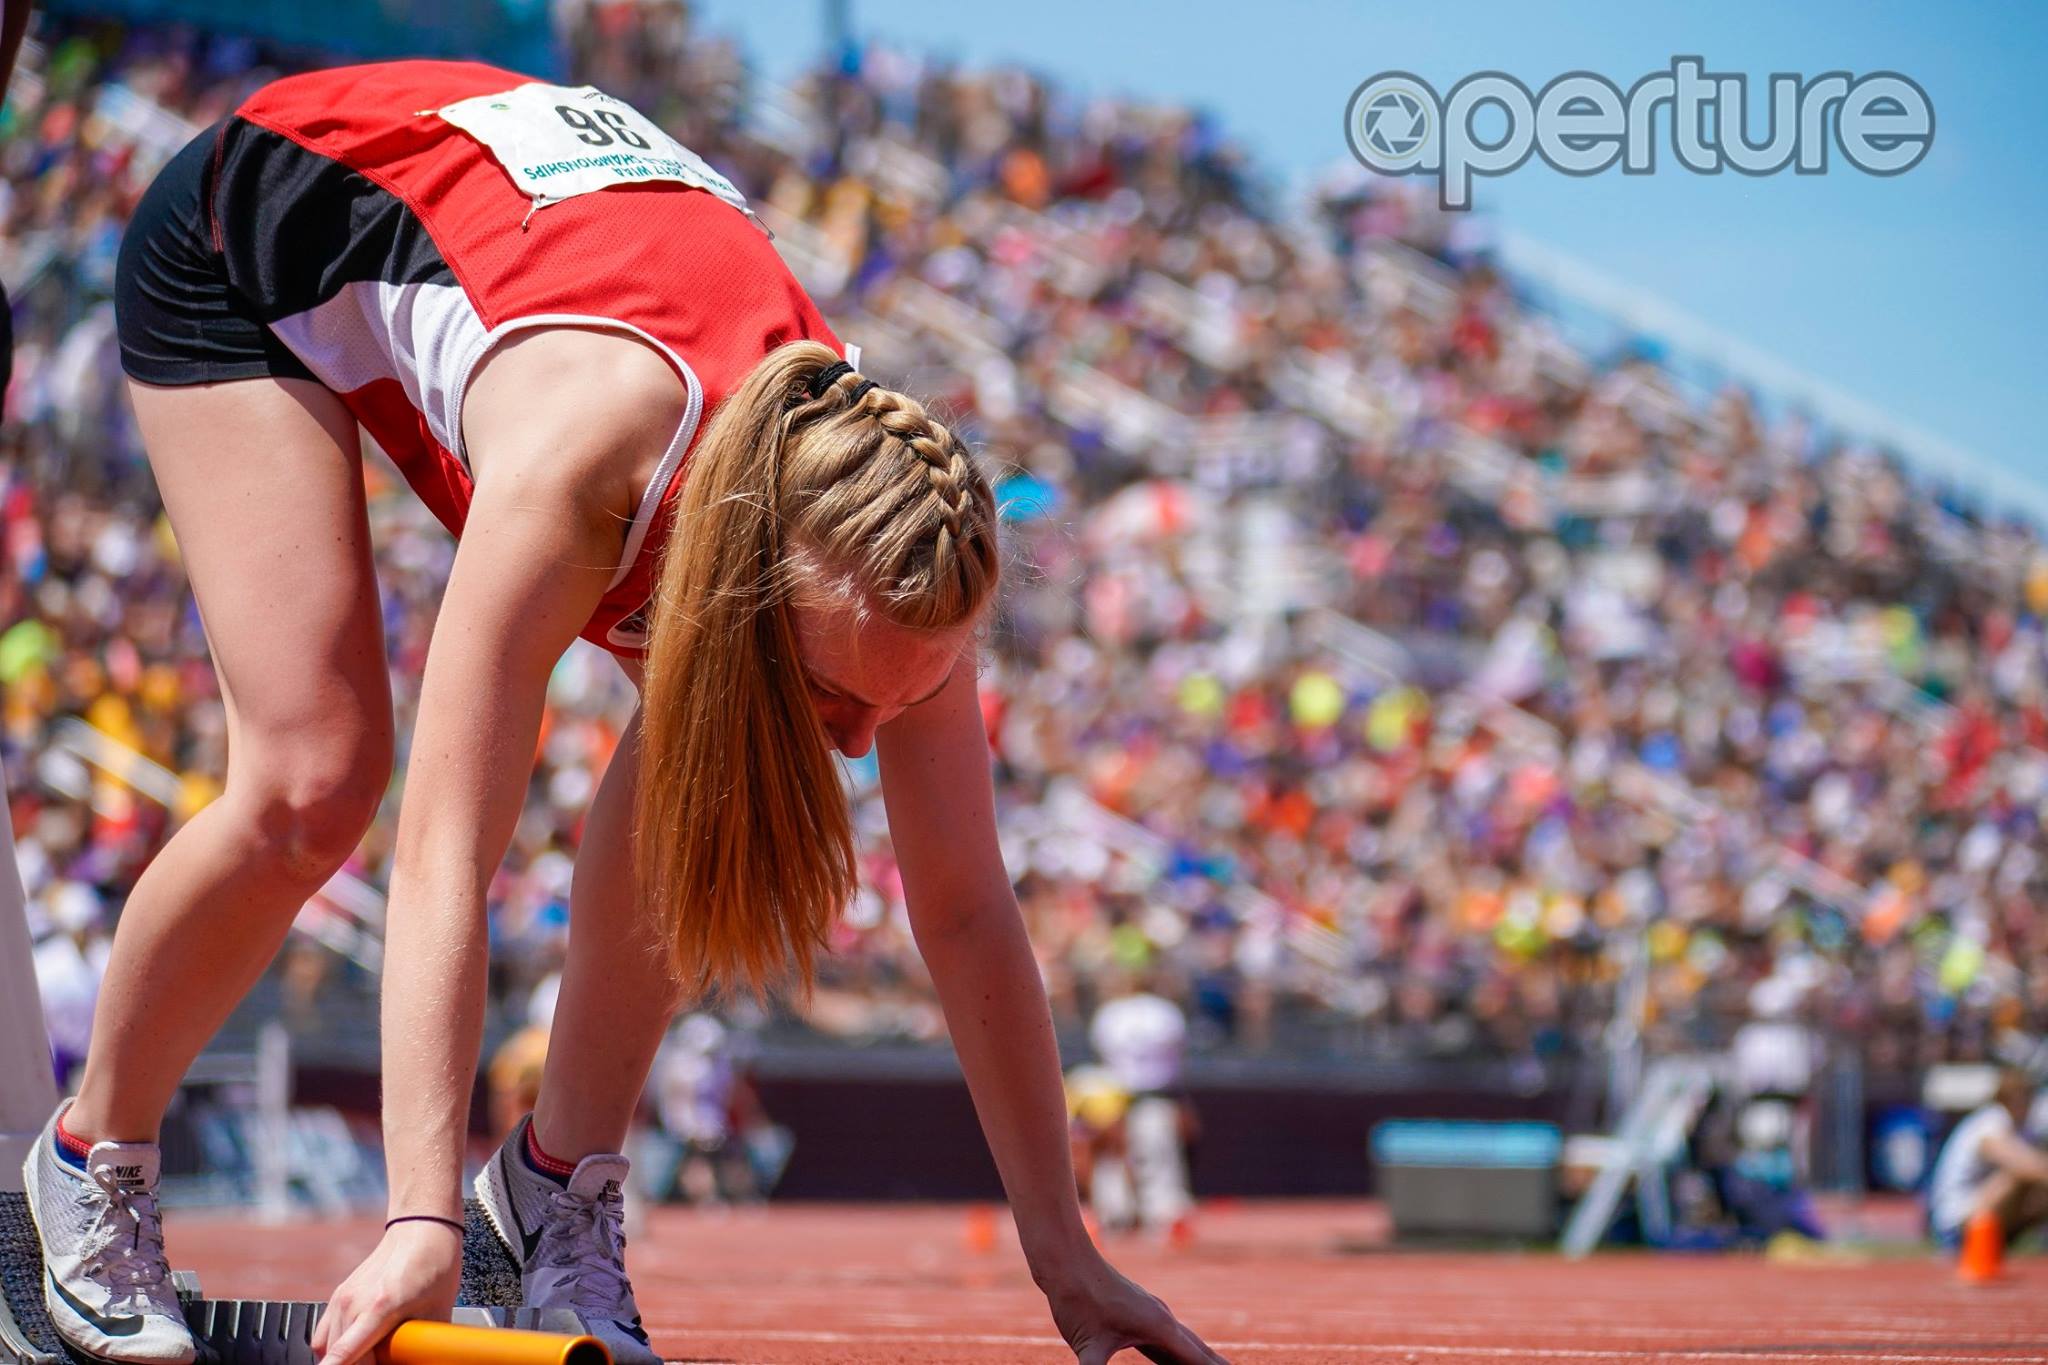 Here’s a list of area athletes taking part in today’s WIAA state track